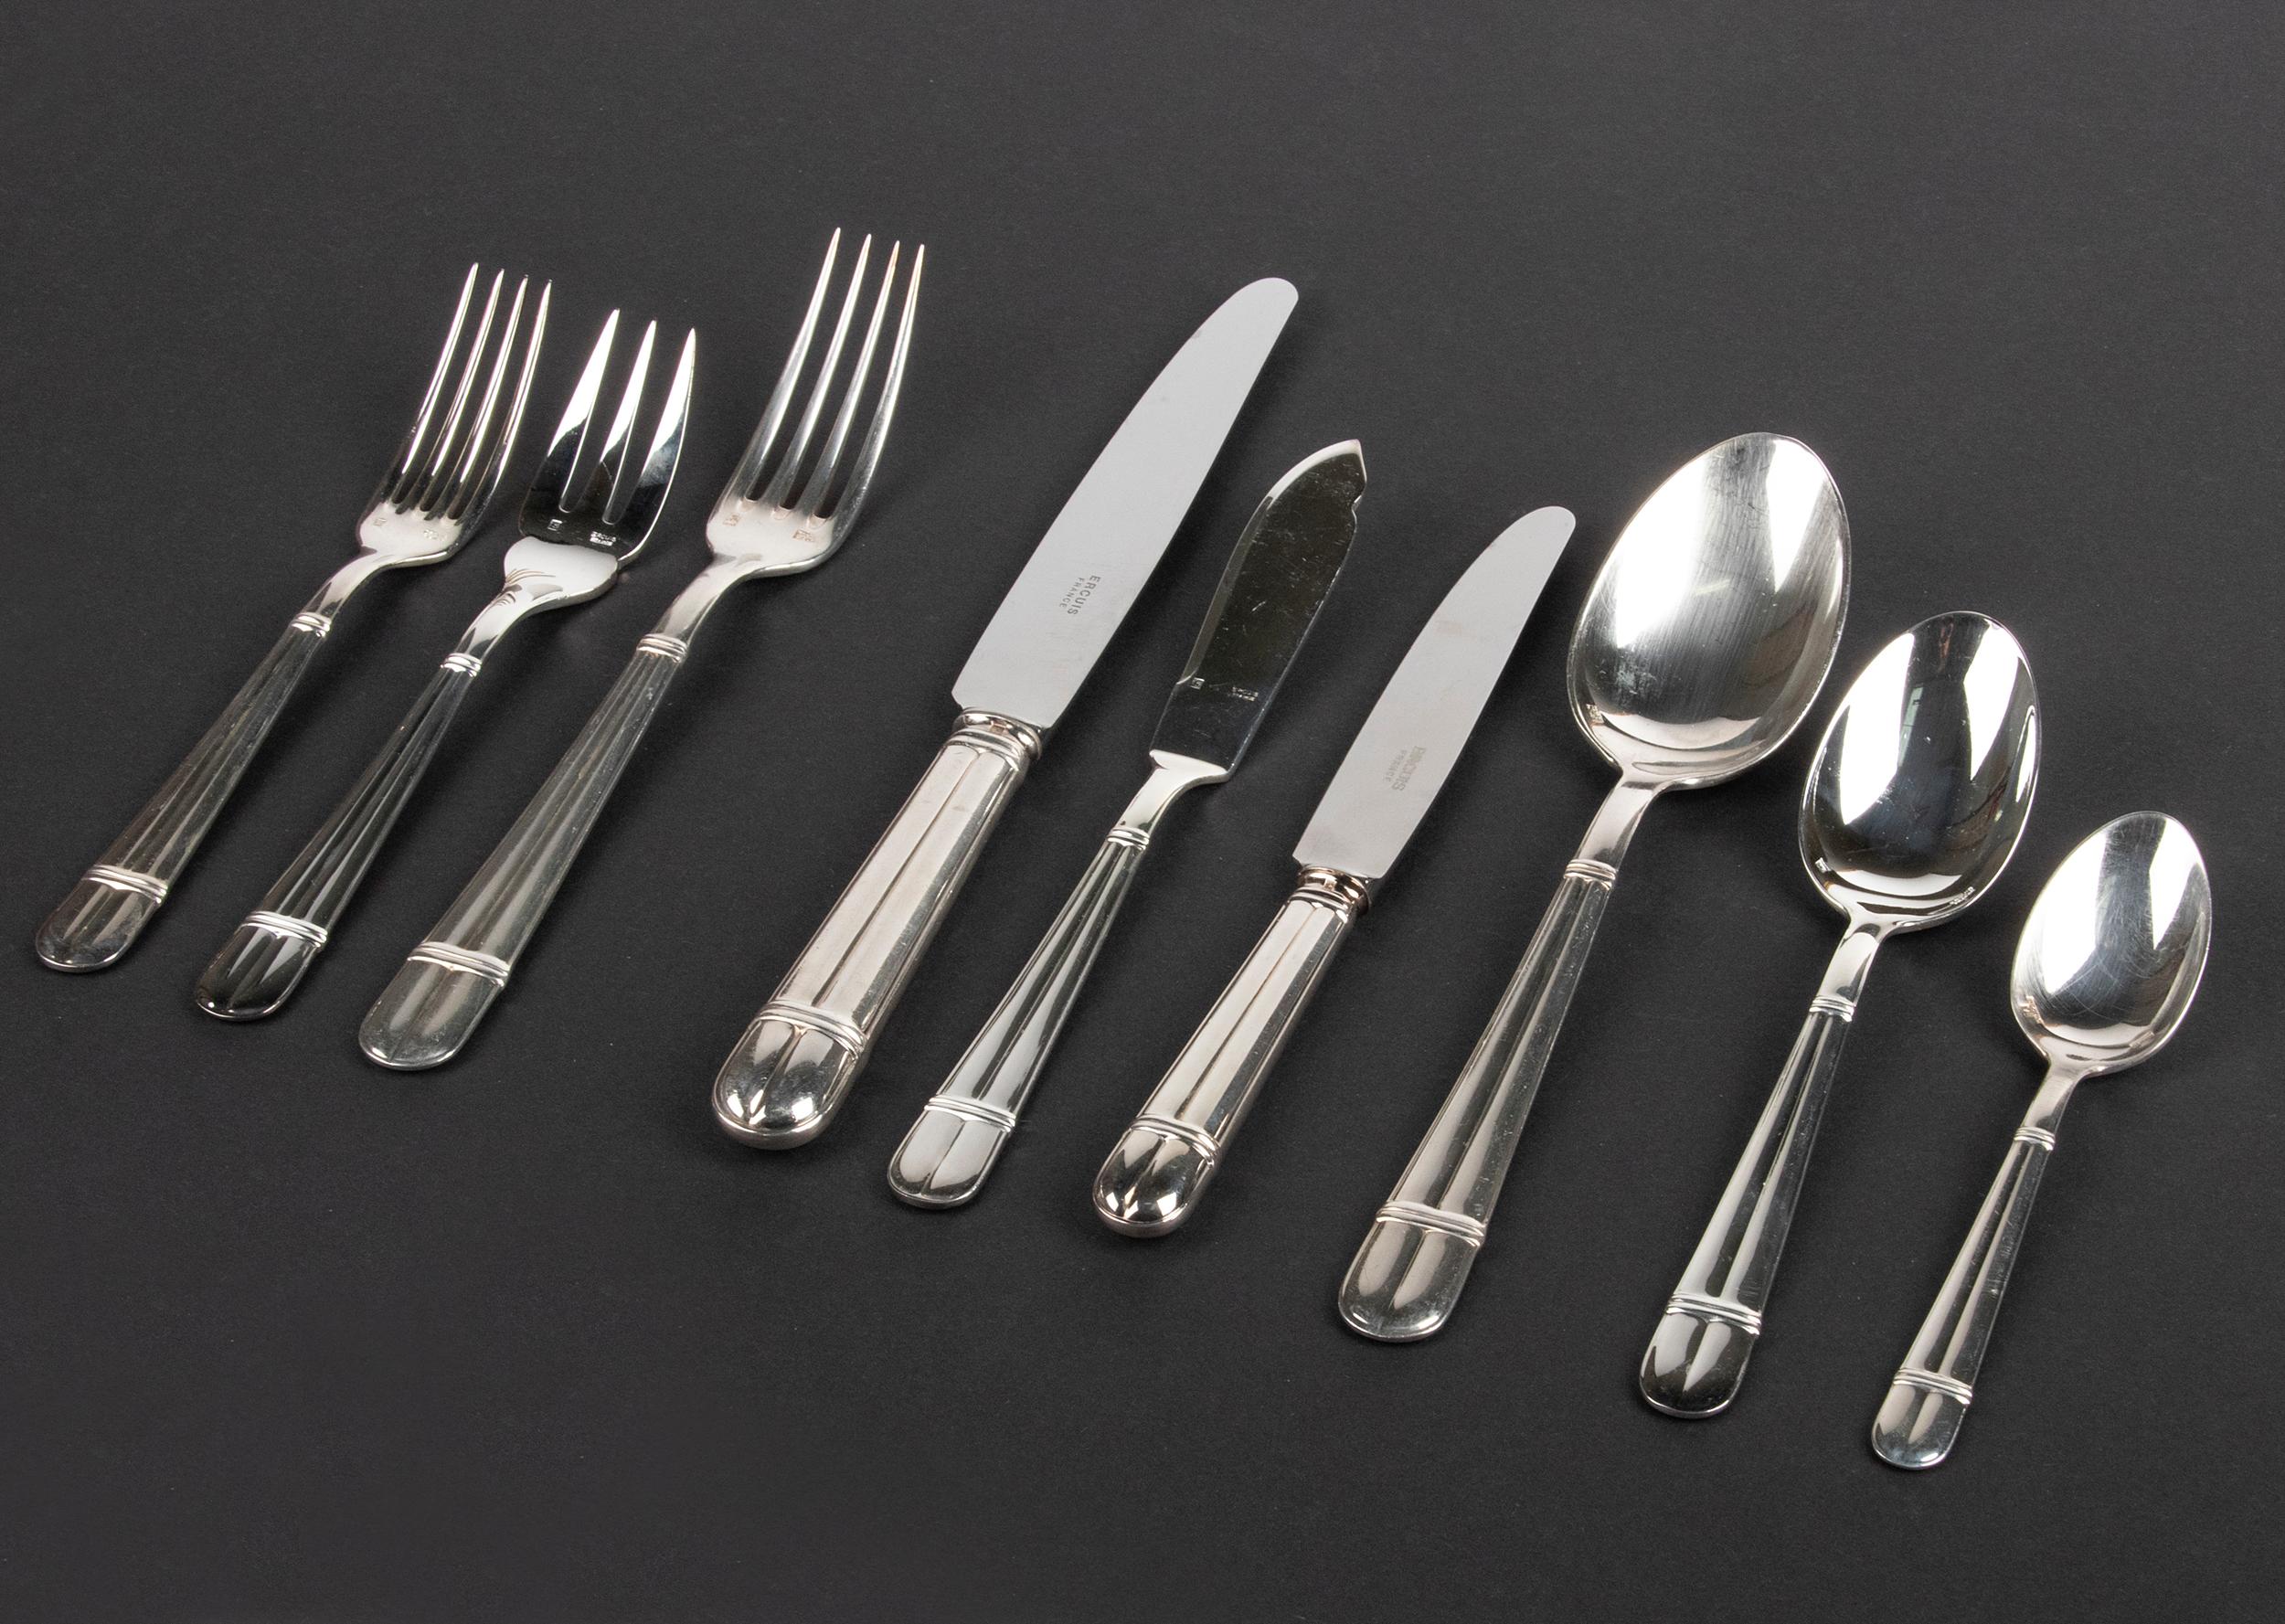 106-Piece Set of Silver Plated Cutlery from Ercuis, France 2